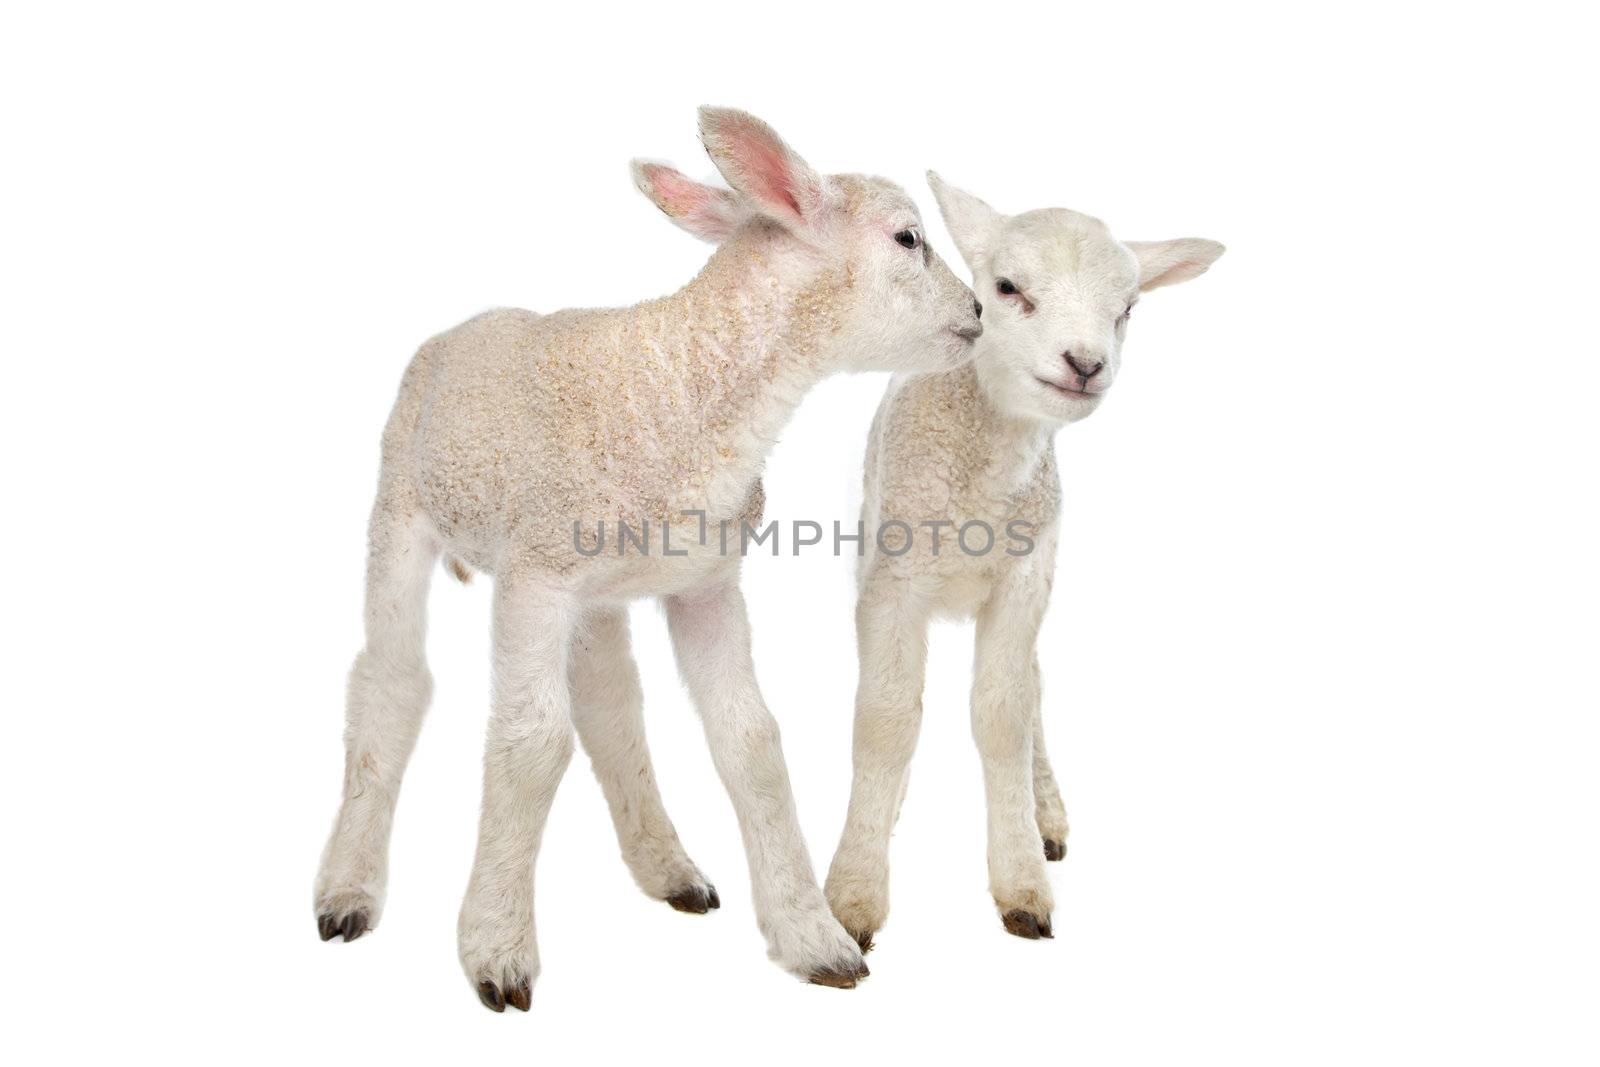 Two little lambs by eriklam